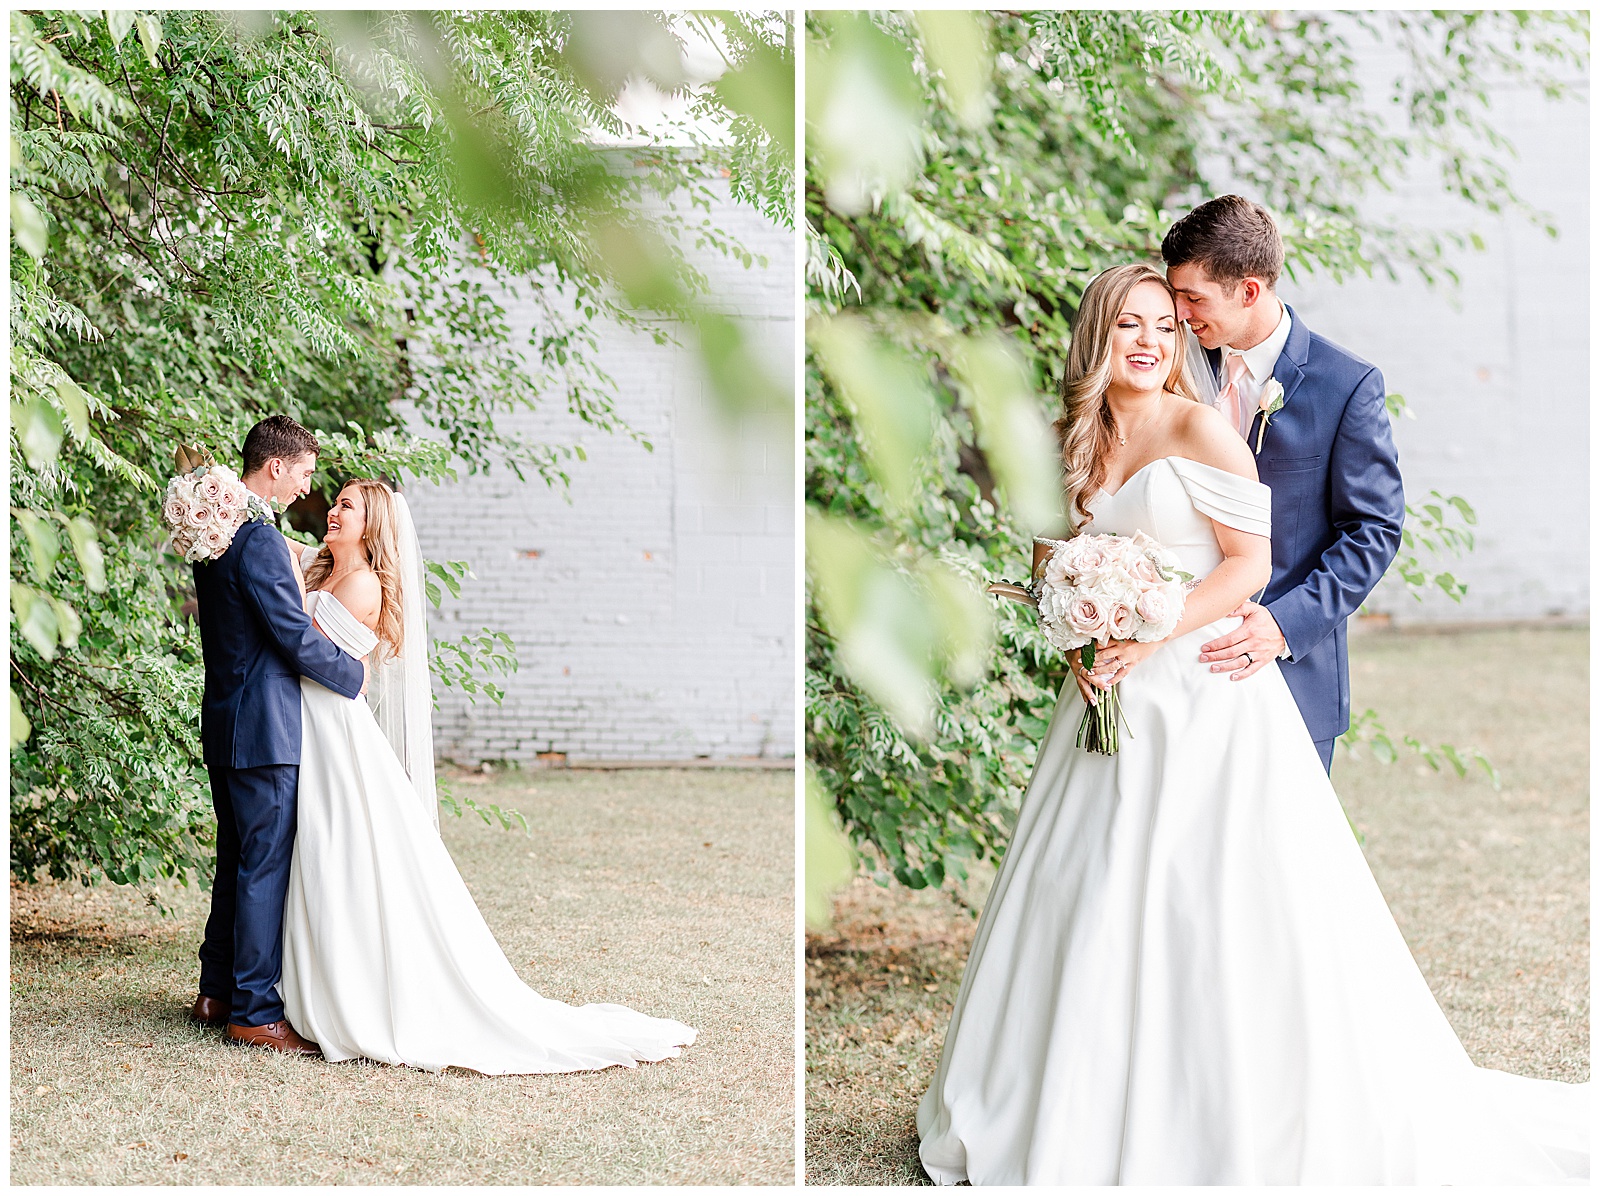 Stunning Bride and Groom with off shoulder wedding dress and blue suit in outdoor portraits in front of white grungy wall from Summer Wedding in Charlotte, NC | Check out the full wedding at KevynDixonPhoto.com